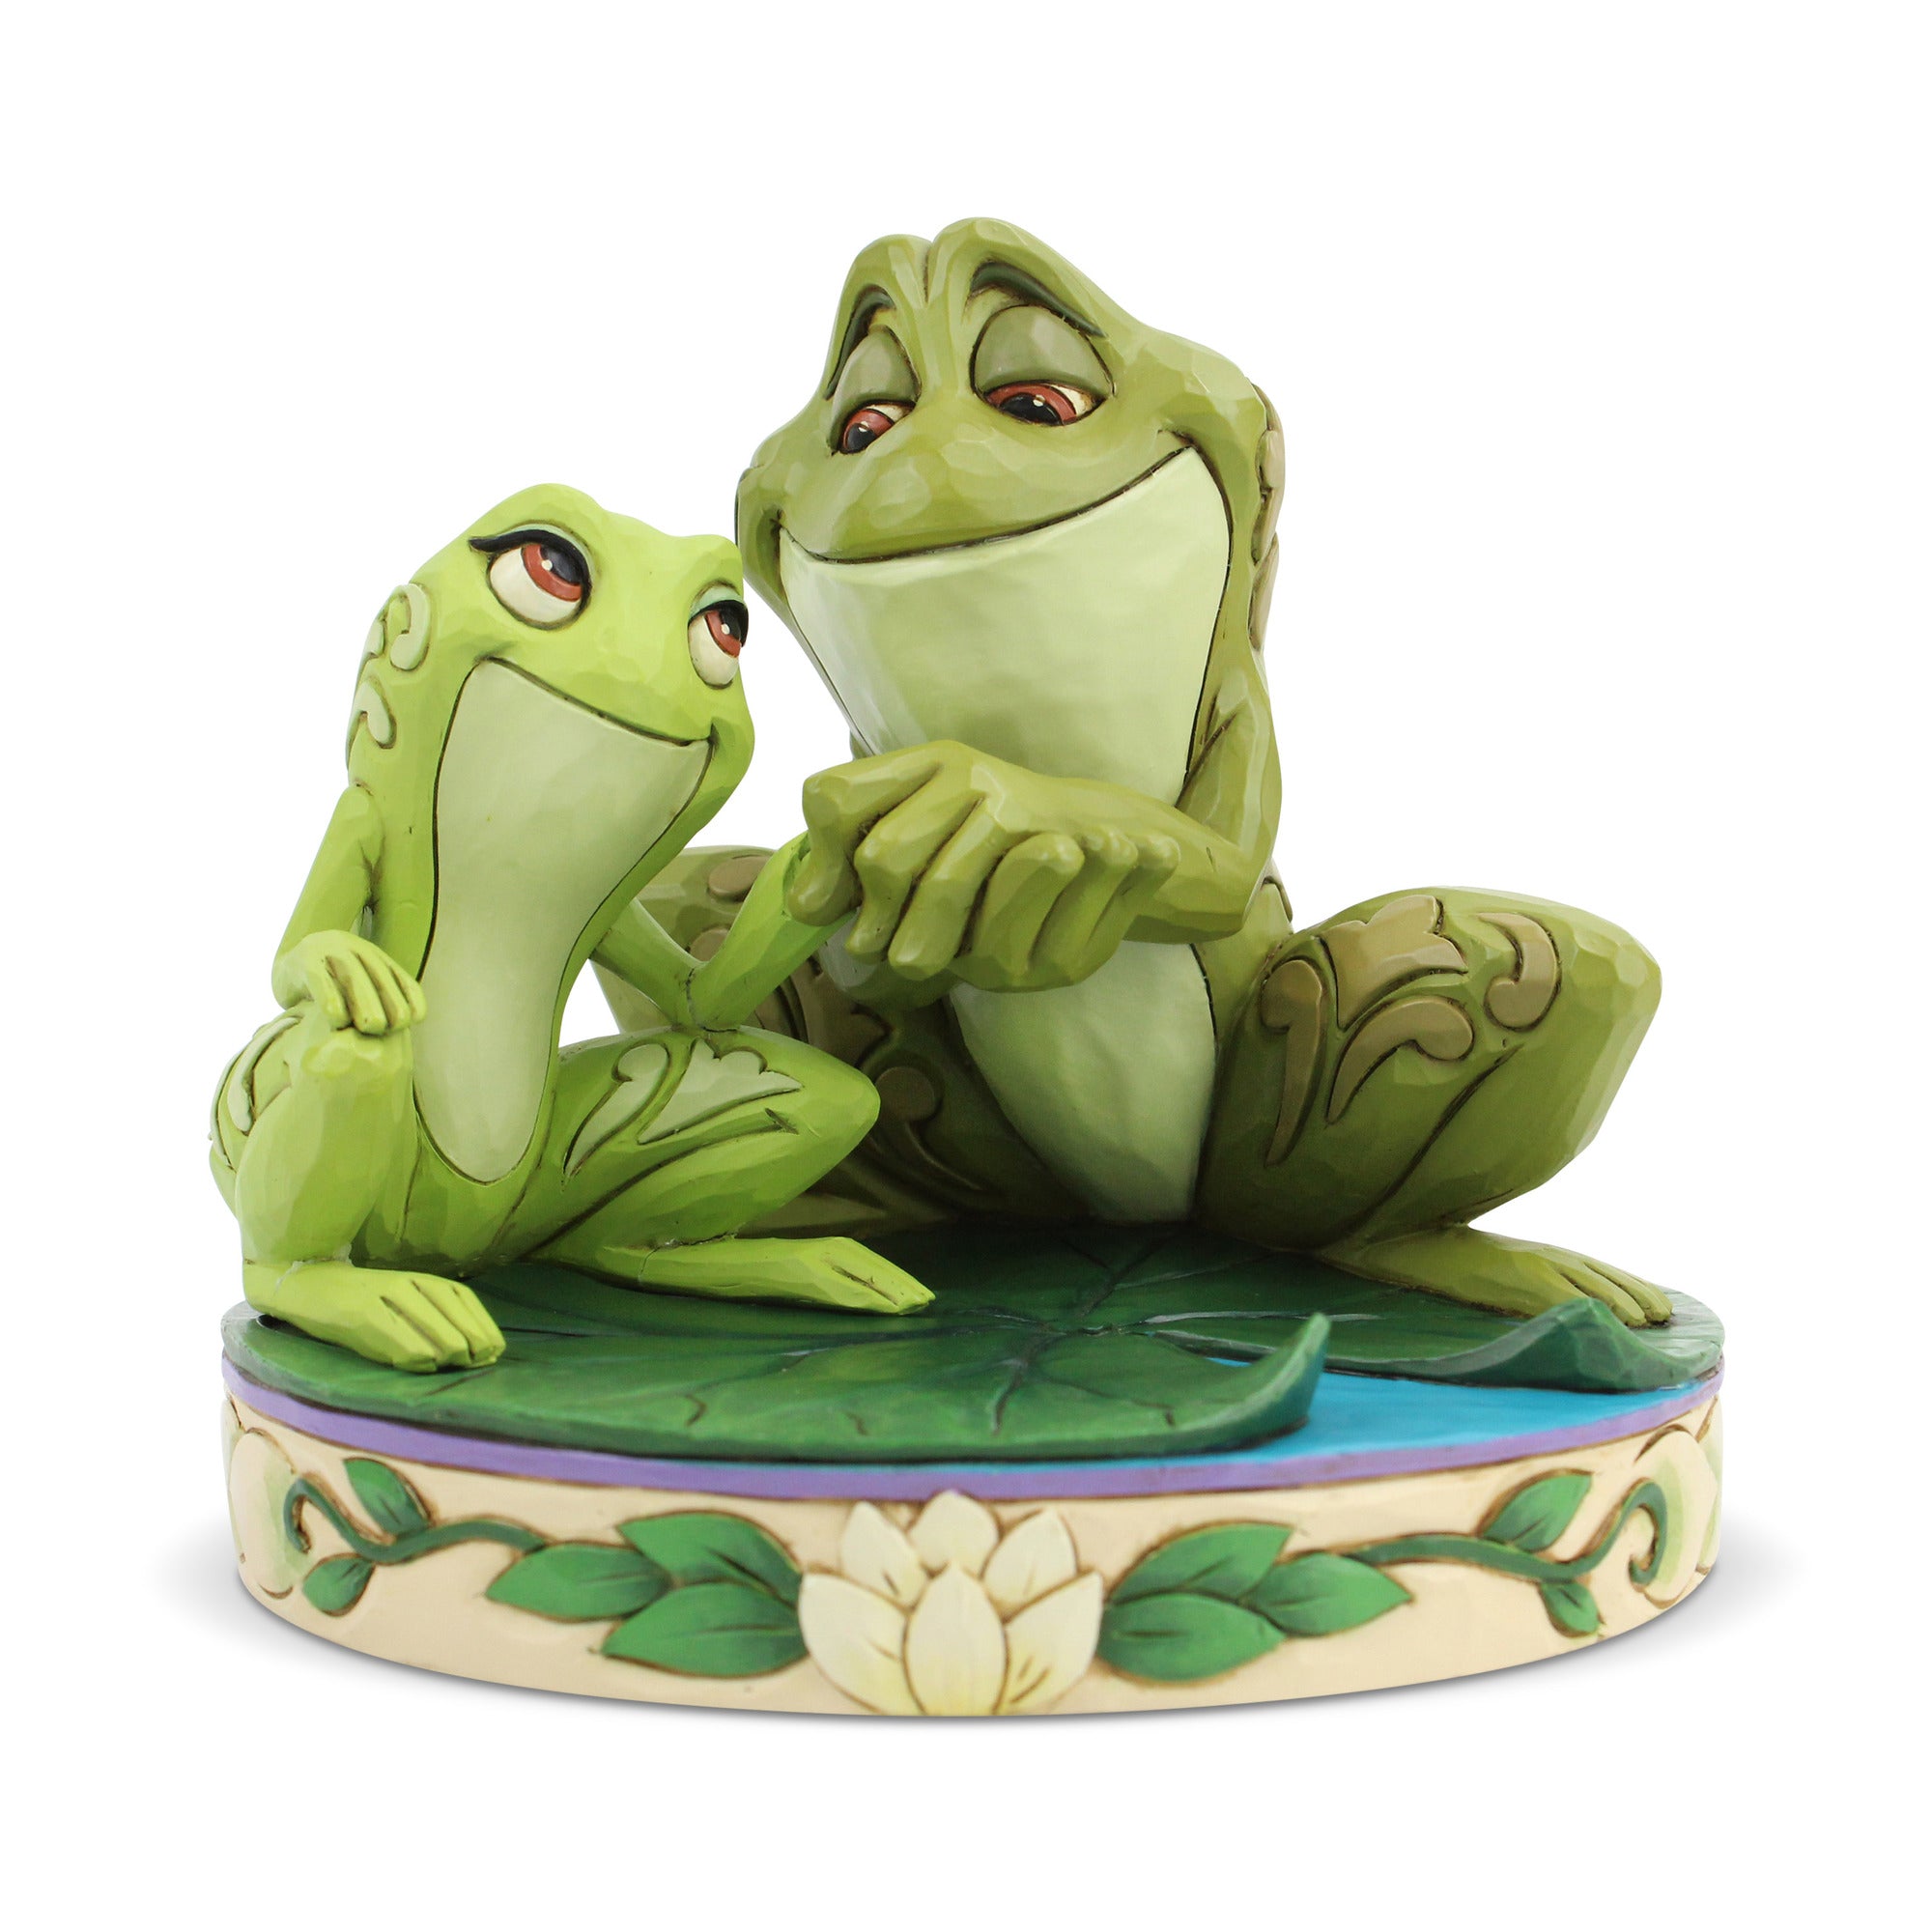 The Princess And The Frog - Tiana & Naveen As Frogs